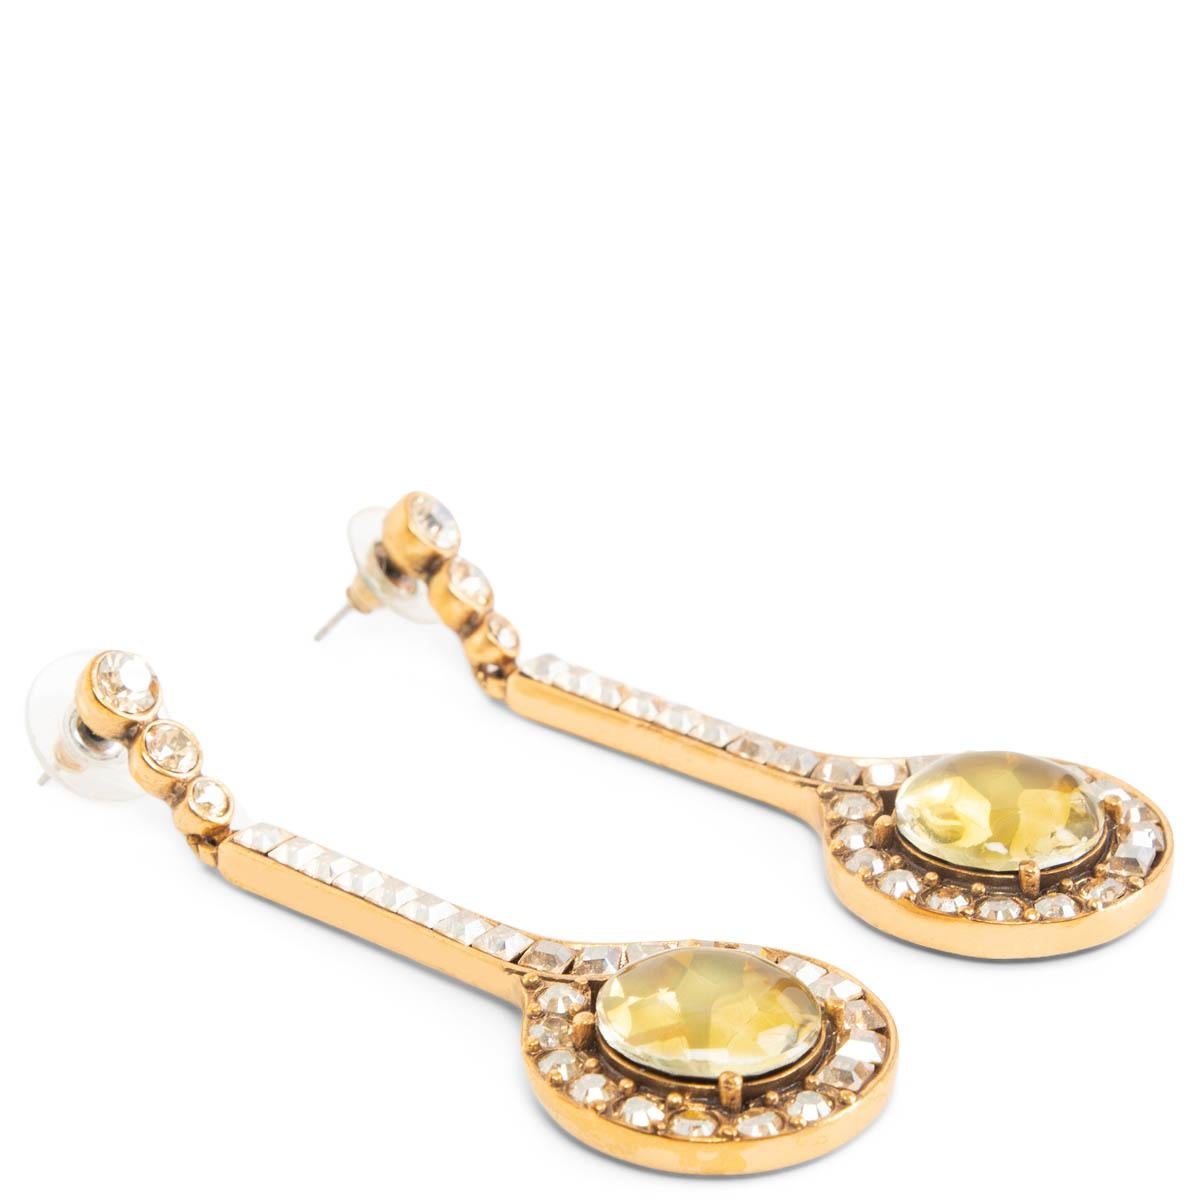 100% authentic Oscar De La Renta drop earrings embellished with crystals and edged in gold-tone brass. Have been worn and are in excellent condition. 

Measurements
Width	2.5cm (1in)
Length	7cm (2.7in)
Hardware	Gold-Tone

All our listings include